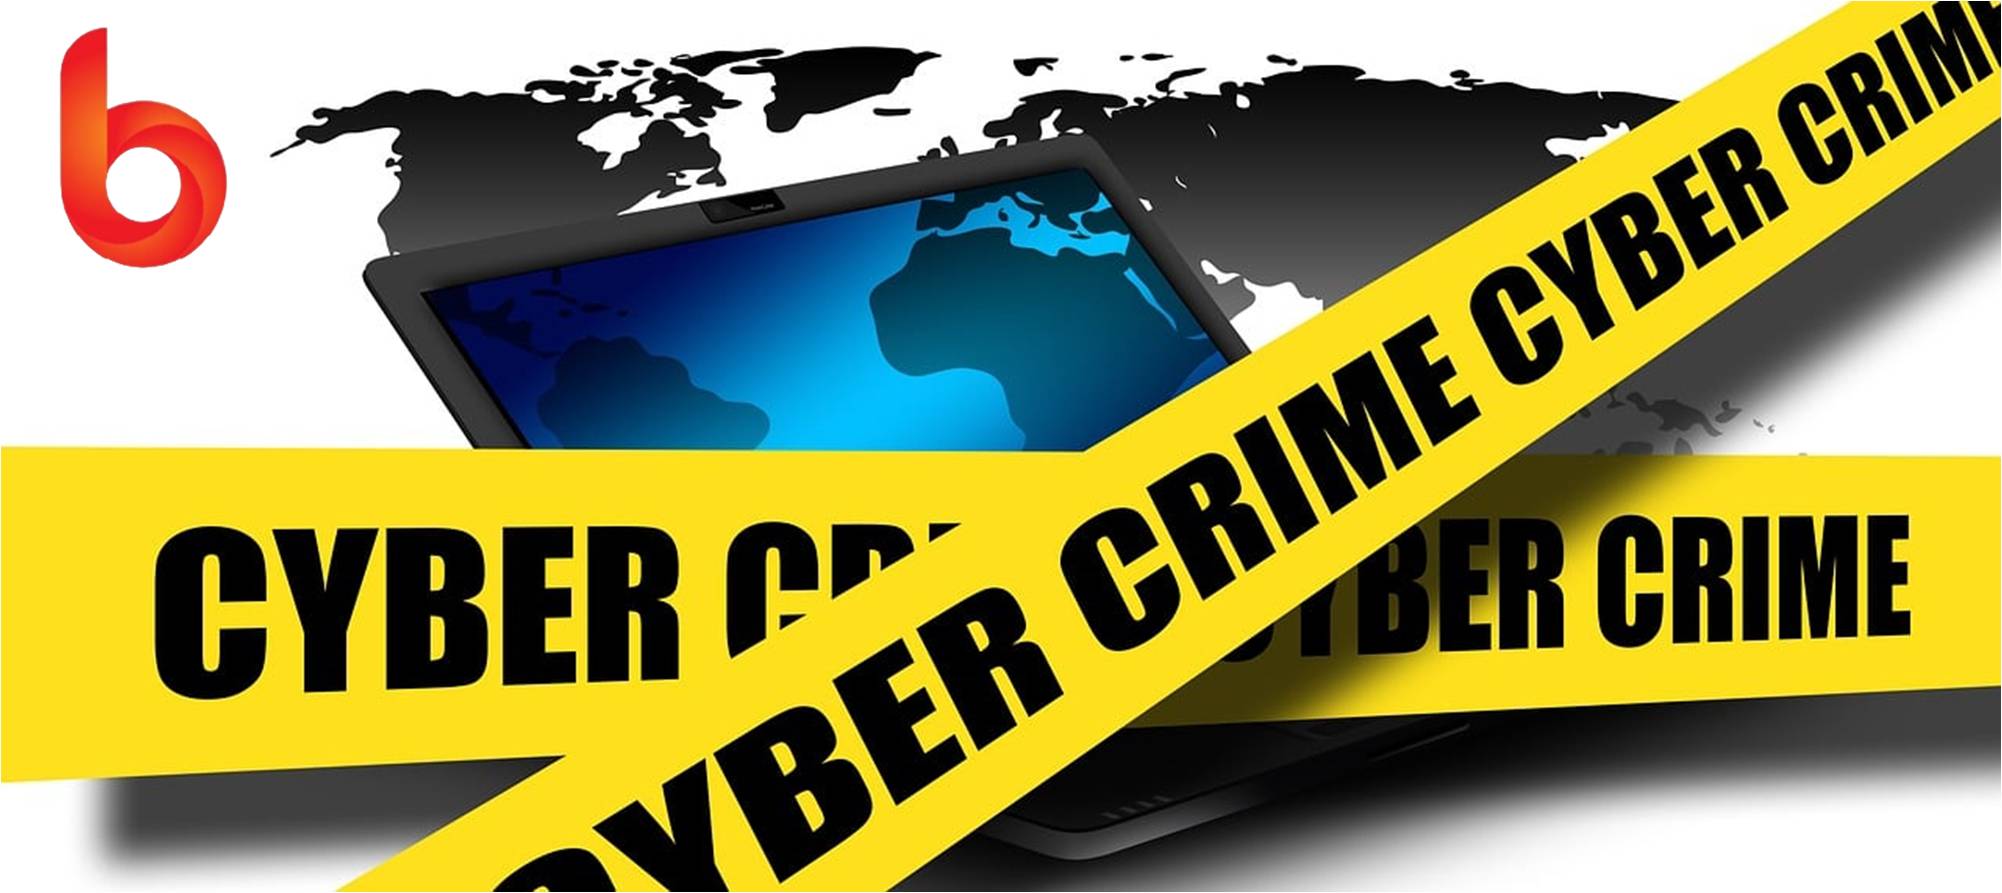 Cyber Crime and Cyber Law